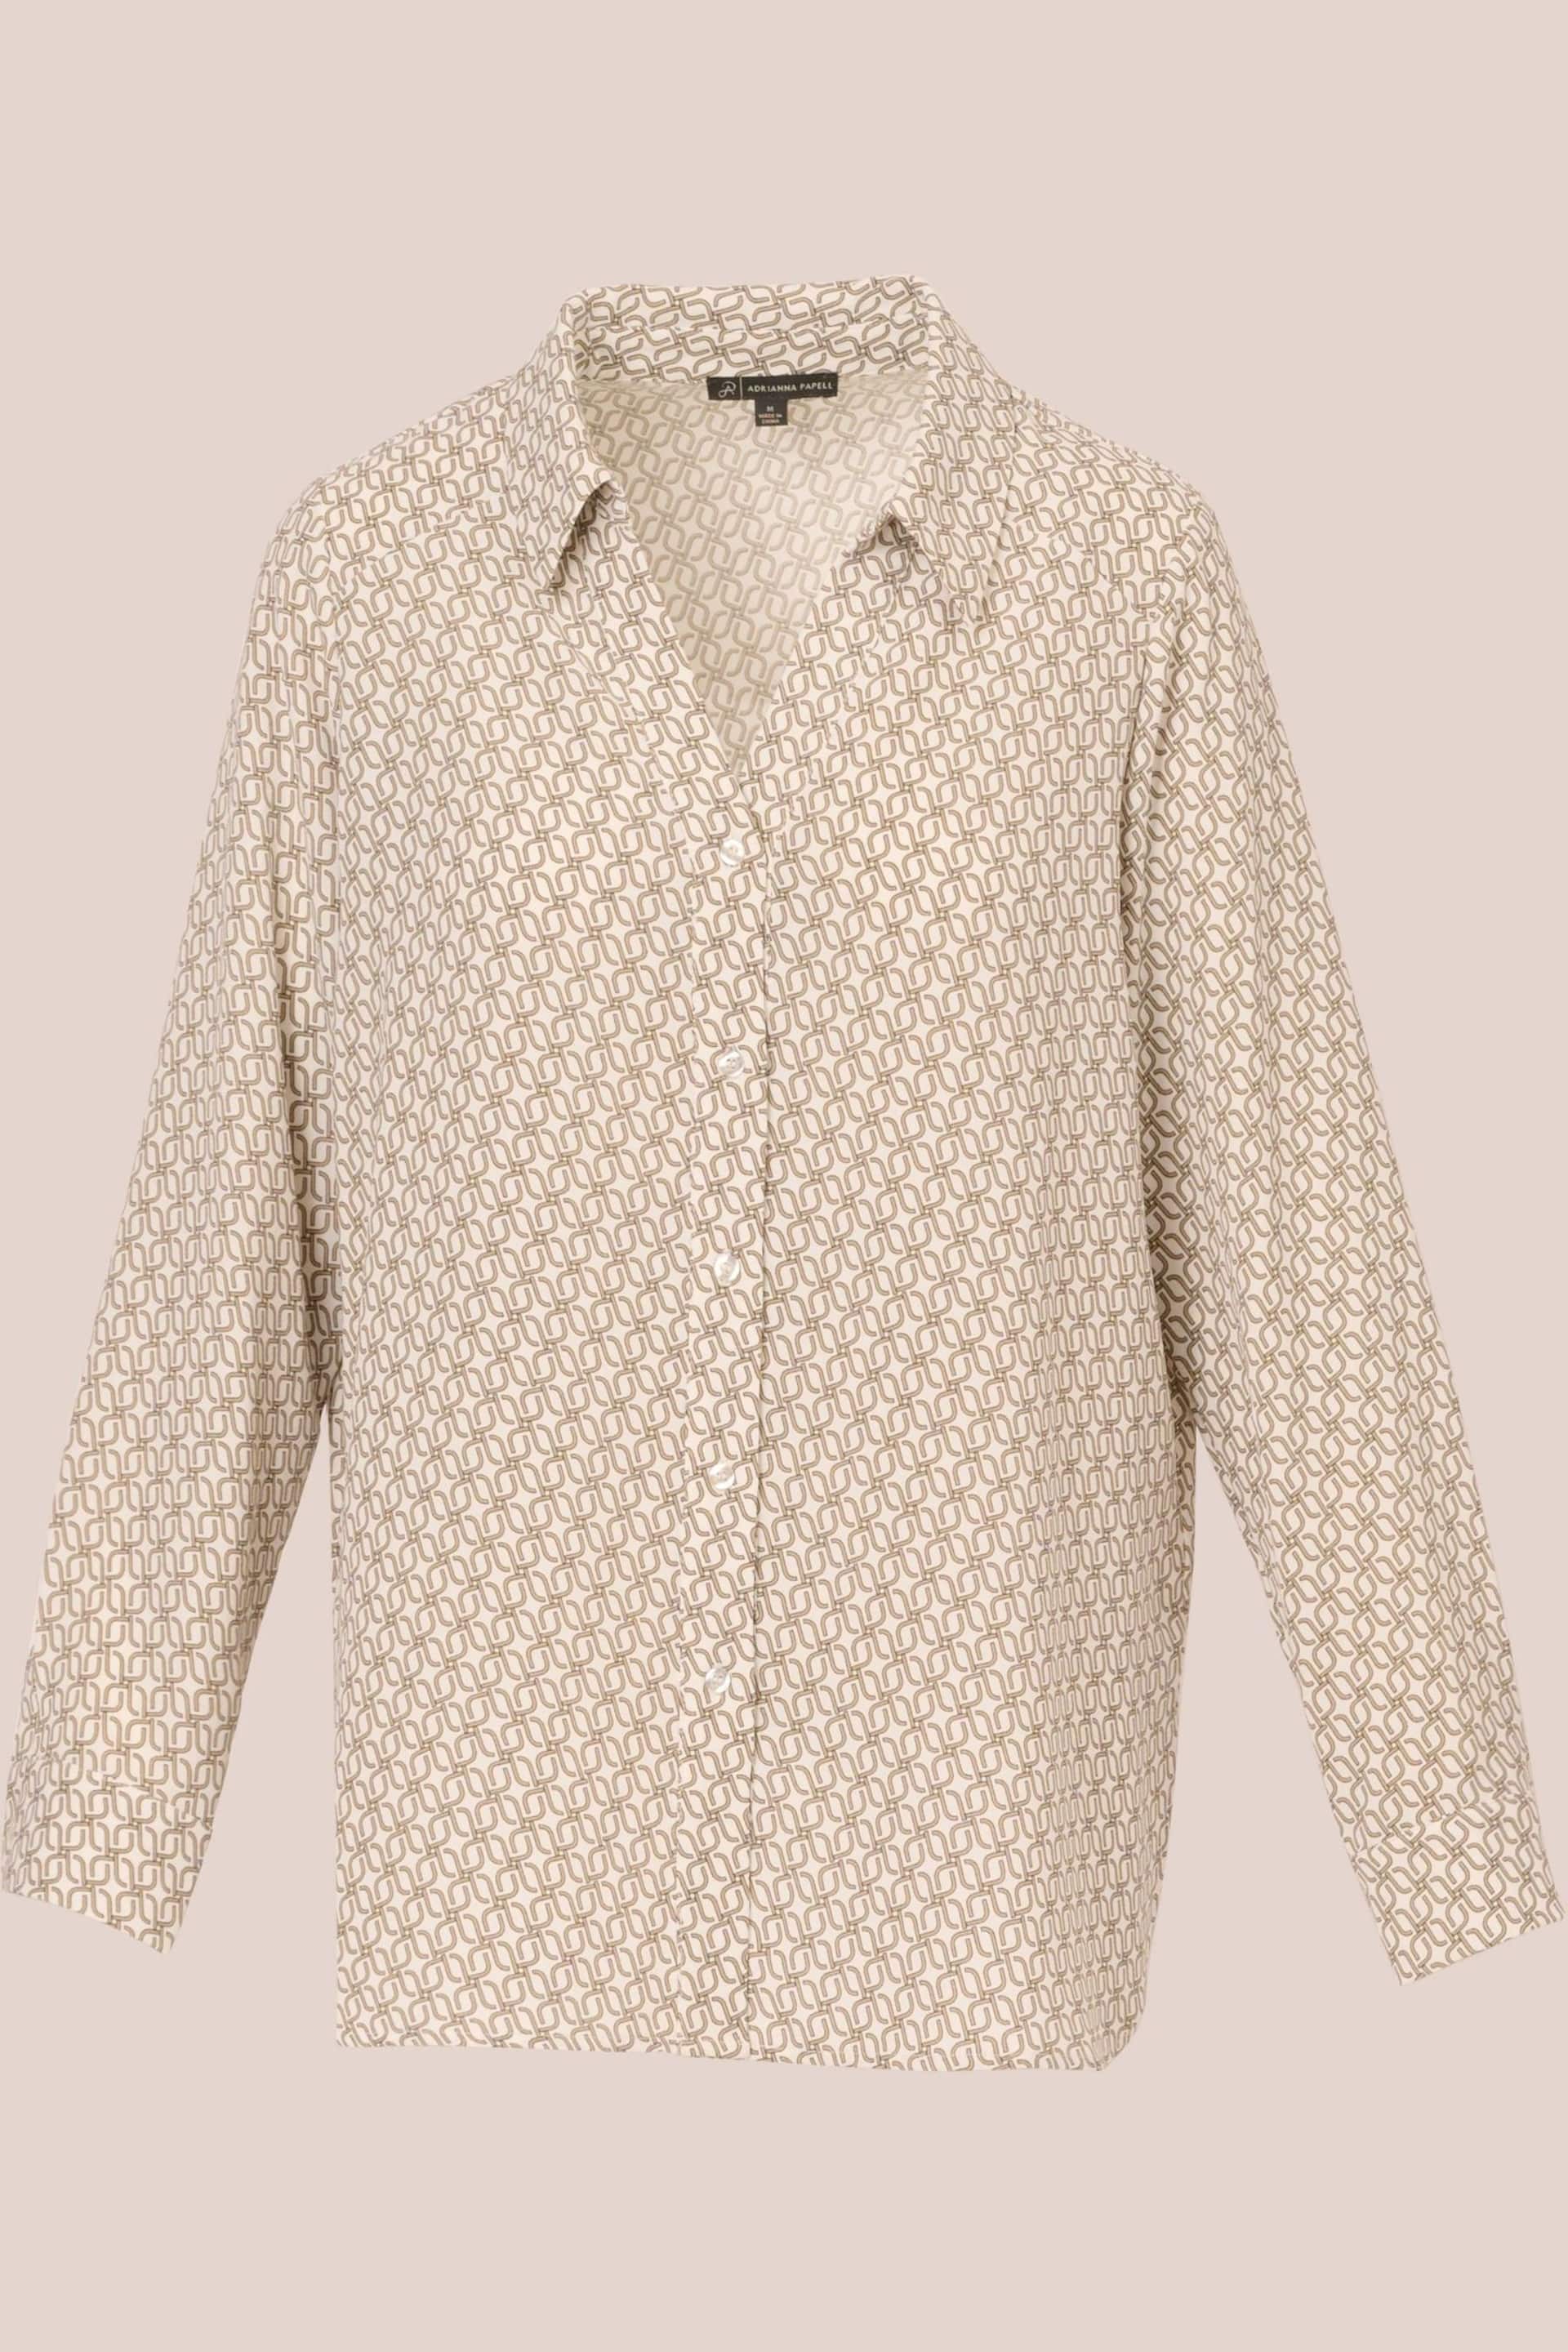 Adrianna Papell Natural Printed Texture Airflow Woven Long Sleeve V-Collar Shirt - Image 6 of 7